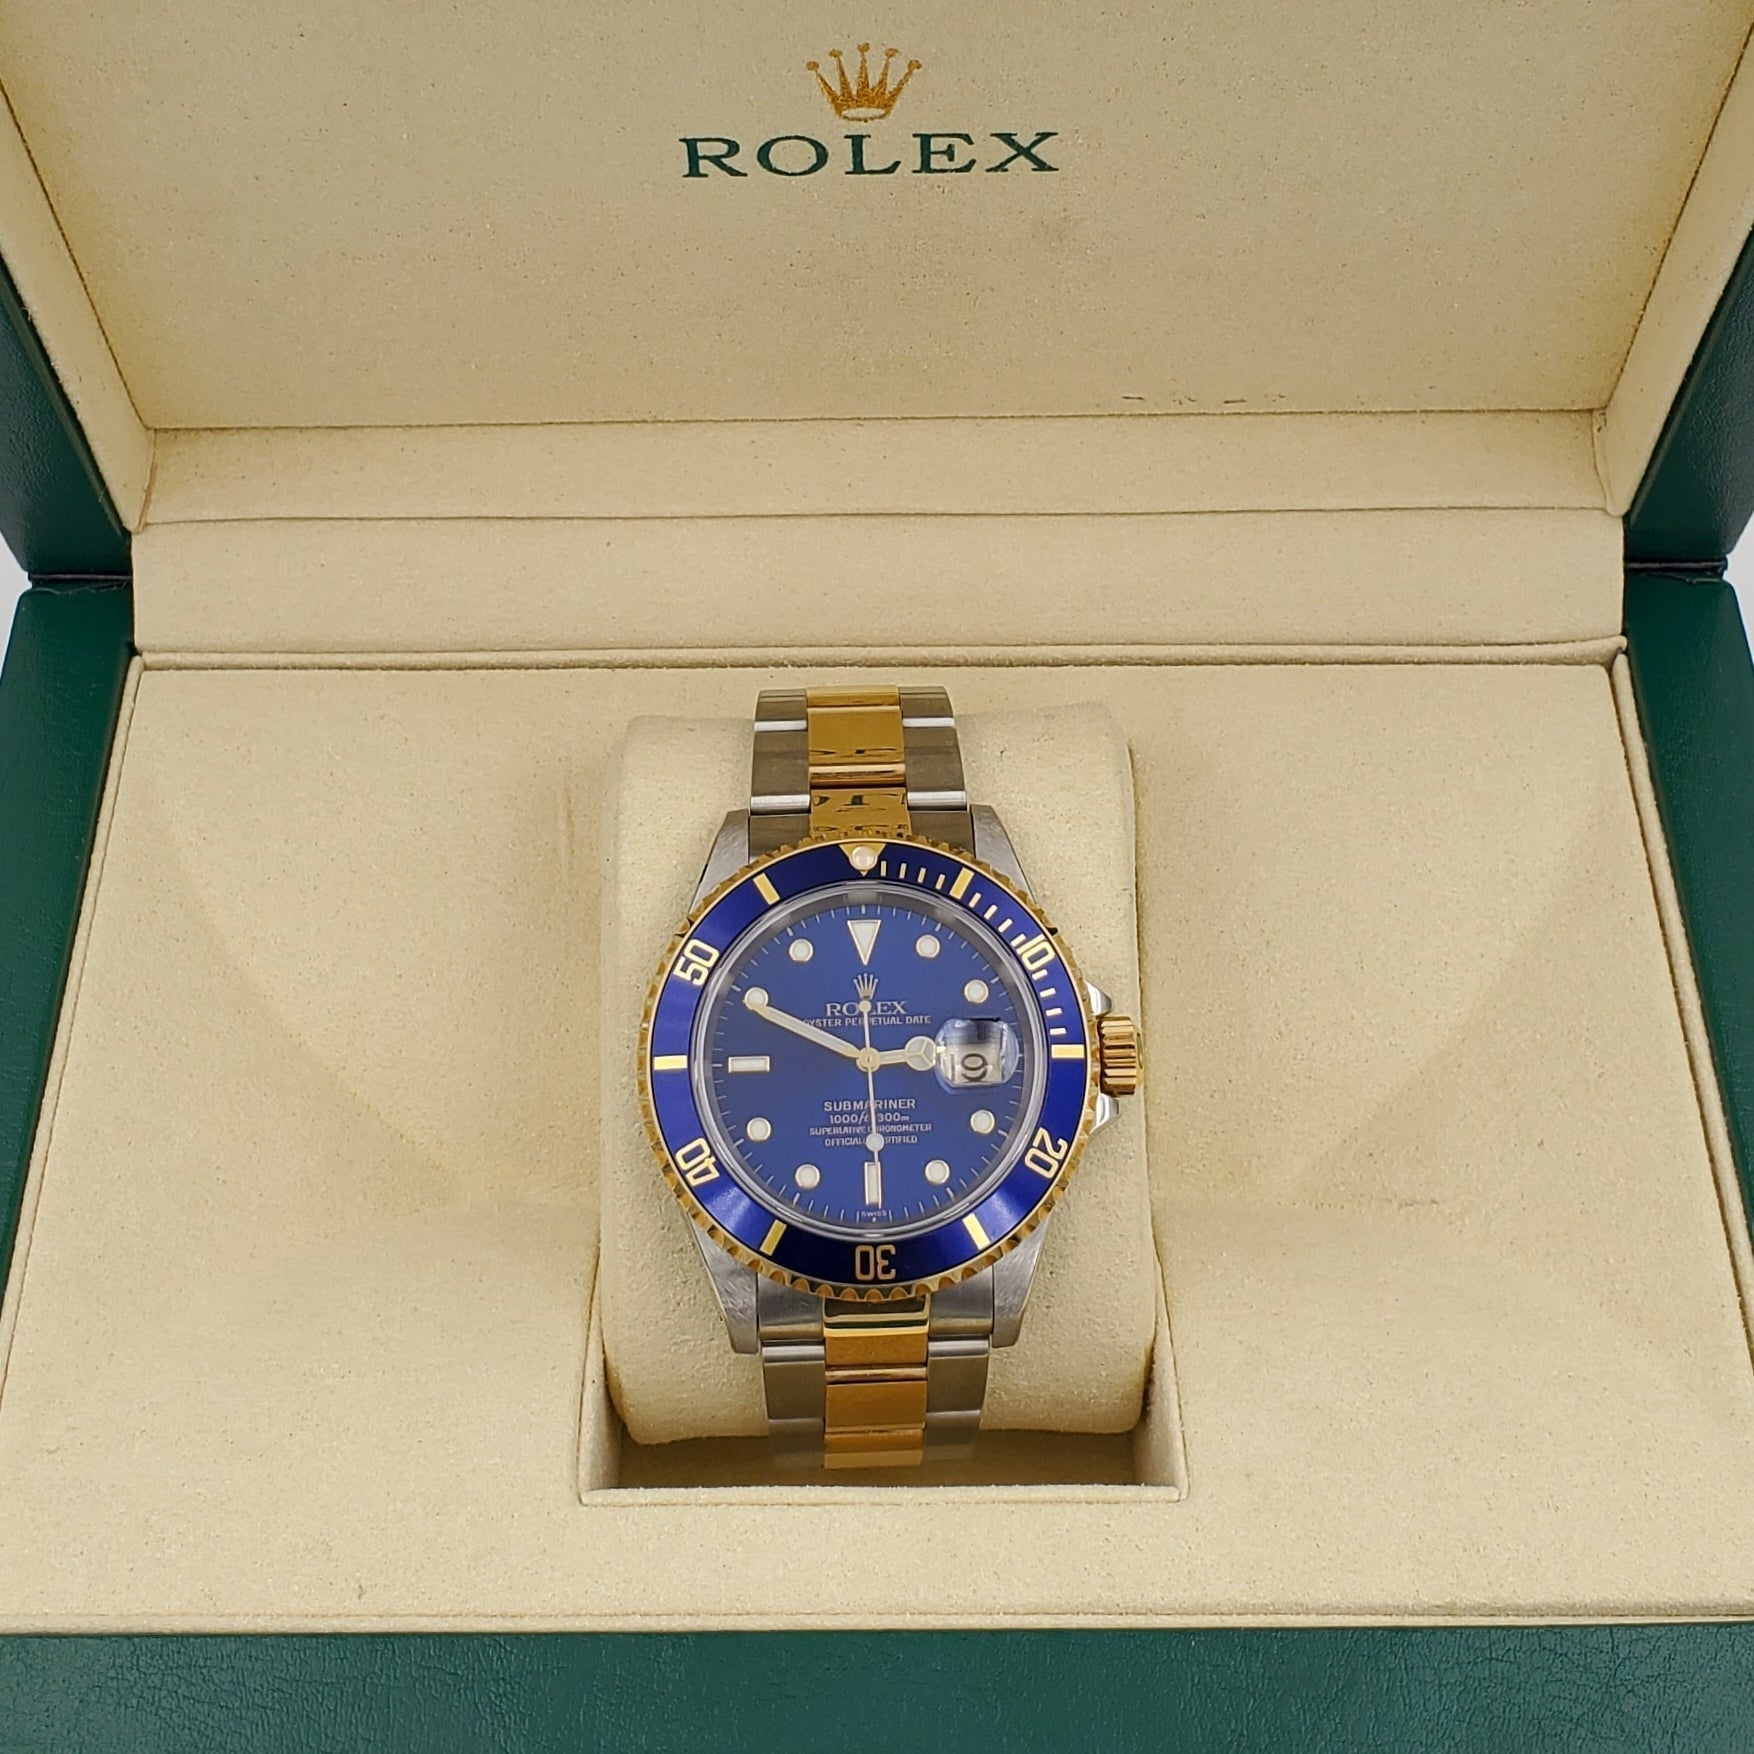 Men's Rolex Submariner 40mm Oyster Perpetual Two Tone 18K Yellow Gold / Stainless Steel Watch with Blue Dial and Blue Bezel. (Pre-Owned 16613)